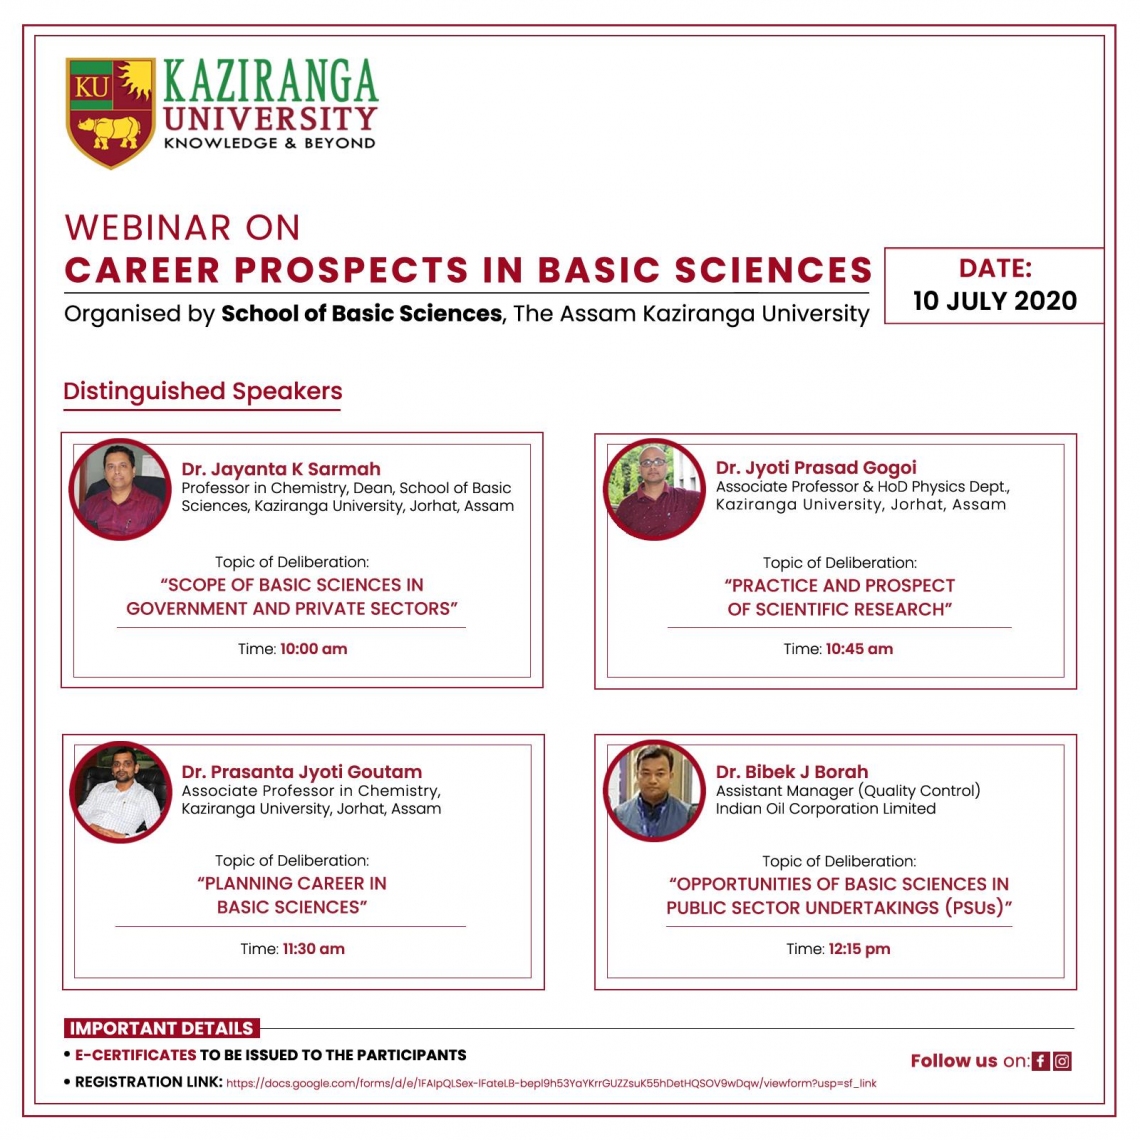 Webinar on the topic, "Career Prospects in Basic Sciences" organized by the School of Basic Sciences